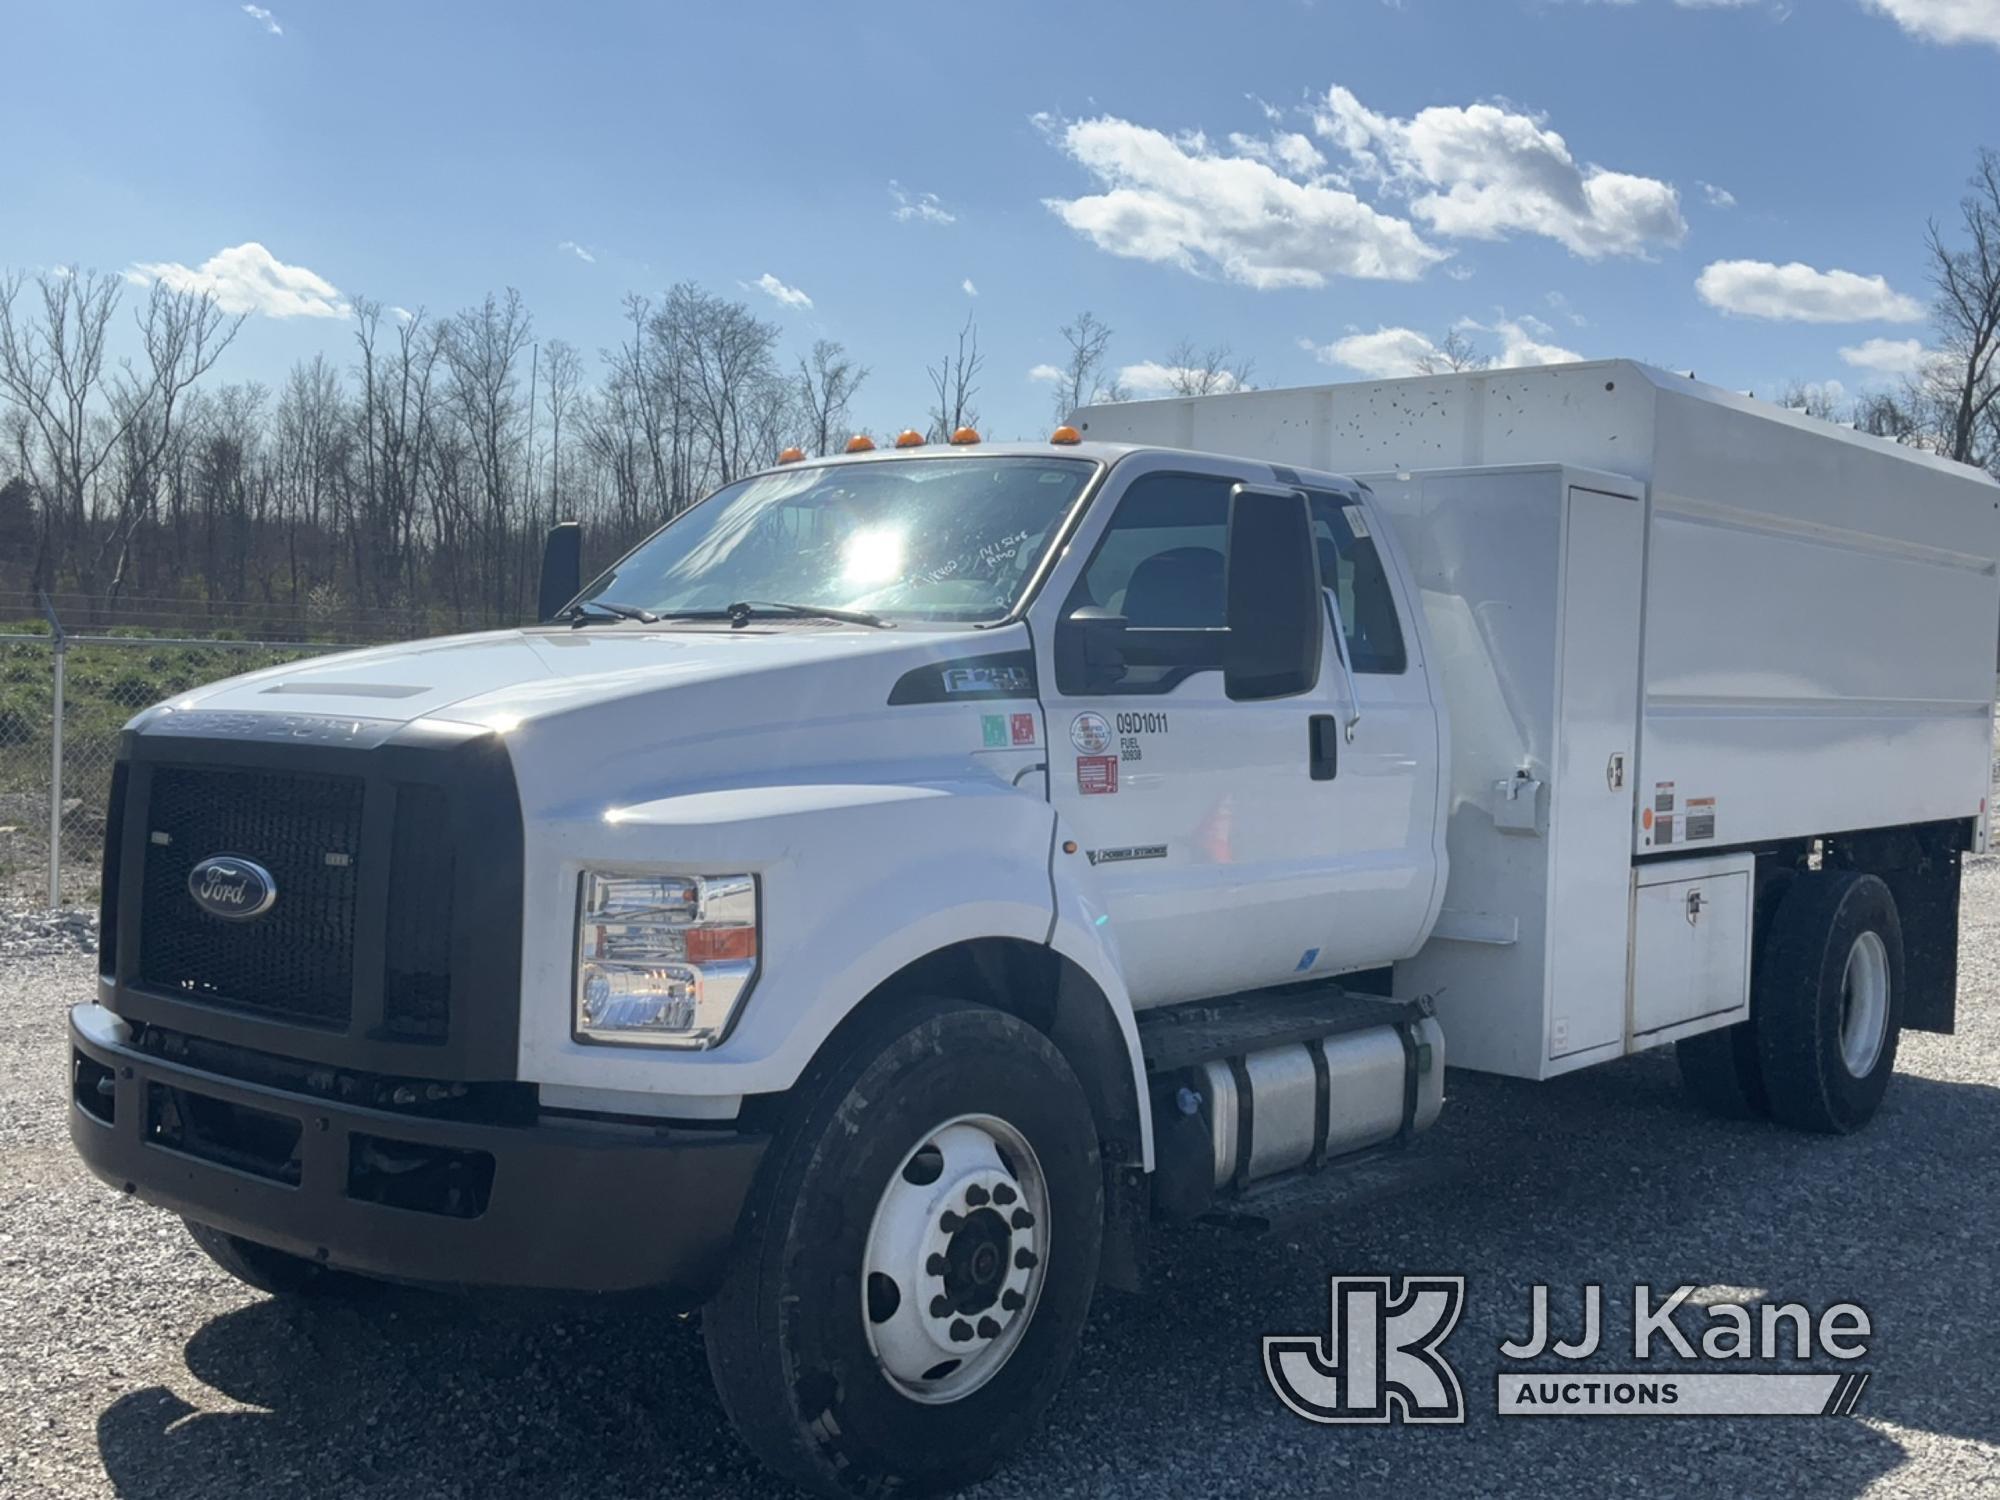 (Verona, KY) 2021 Ford F750 Extended-Cab Chipper Dump Truck Runs, Moves & Operates